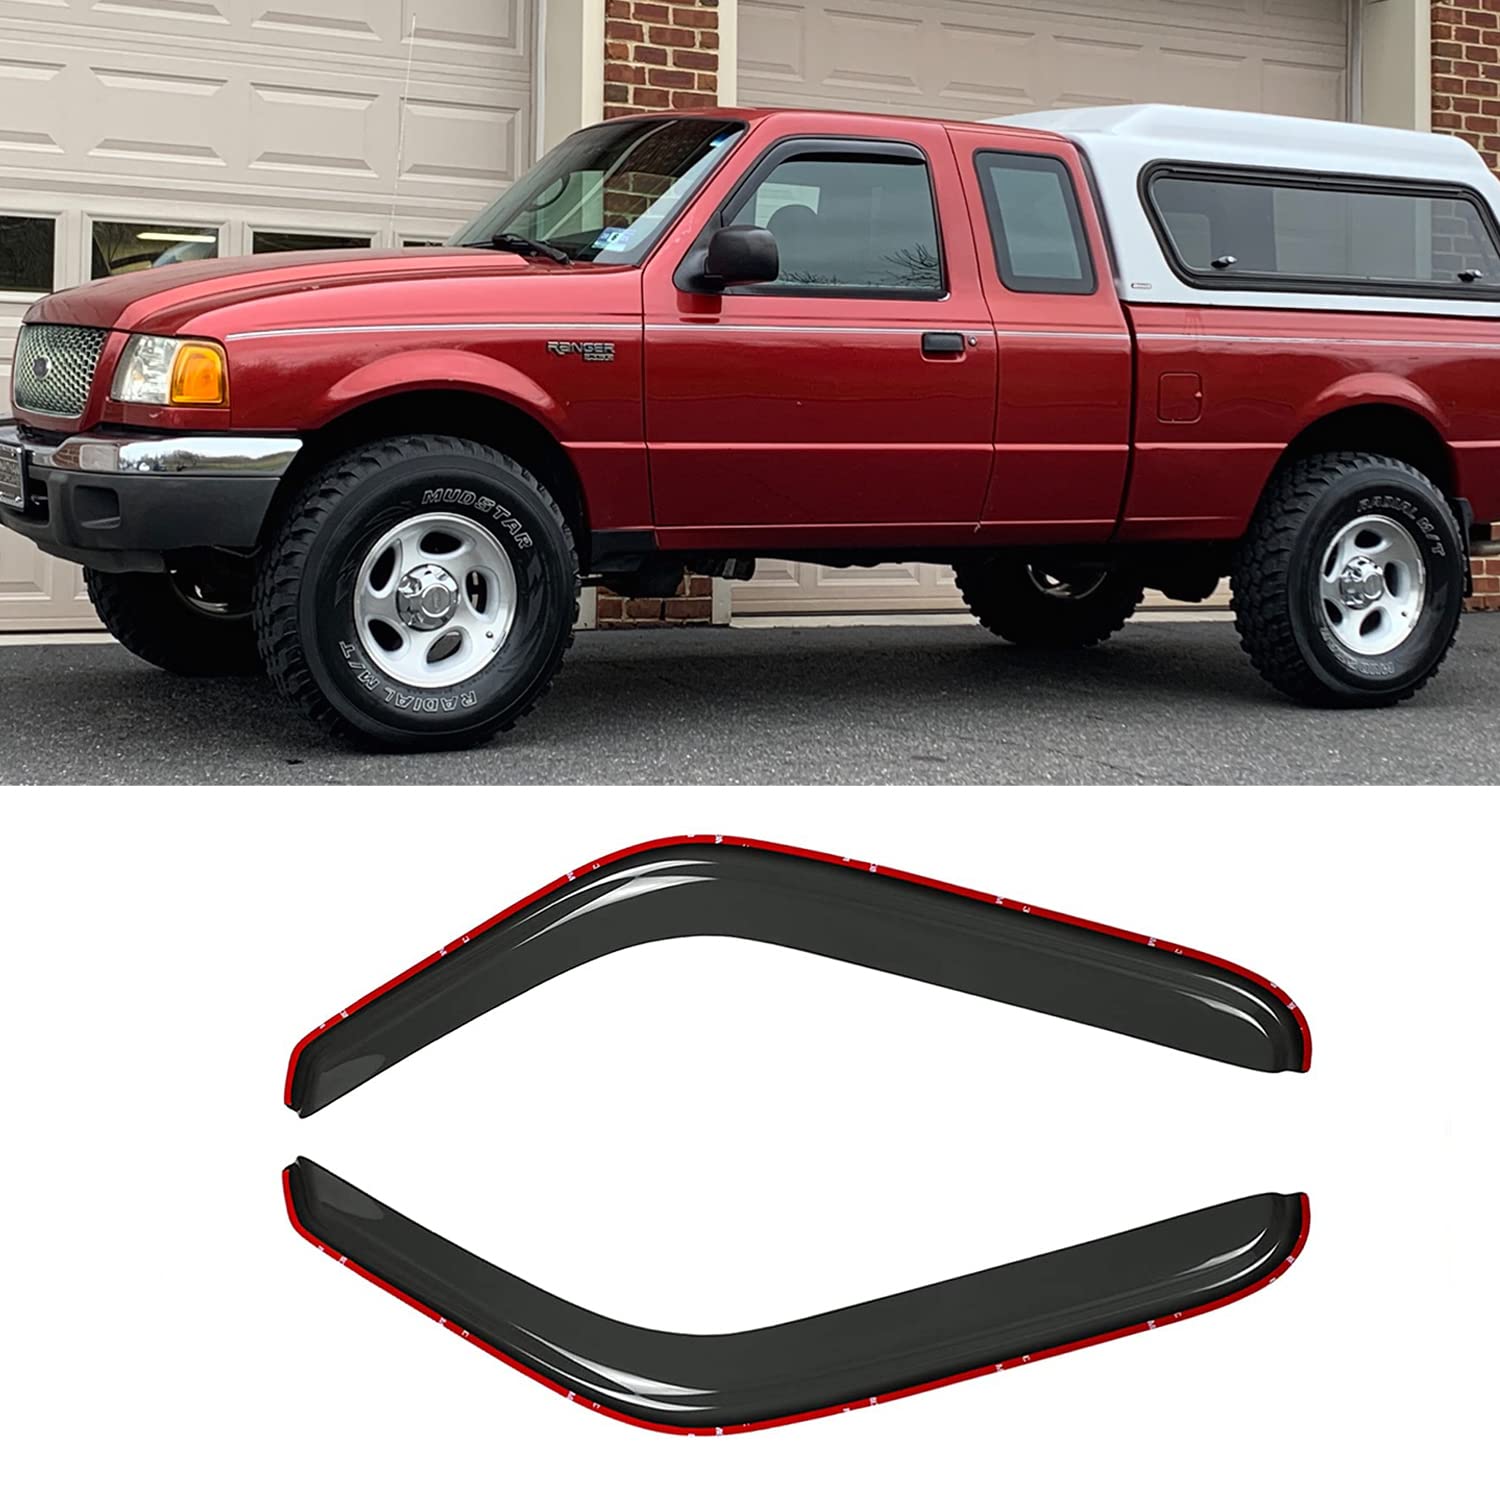 Amazon.com: Puermto Side Window Wind Deflector, 2pc in-Channel Nice Rain  Guards Set, fit for 1993-2011 Ford Ranger,1994-2010 Mazda B2300/B4000,1994-2008  Mazda B3000 with Standard/Extended Cab Window Visor|92083 : Automotive